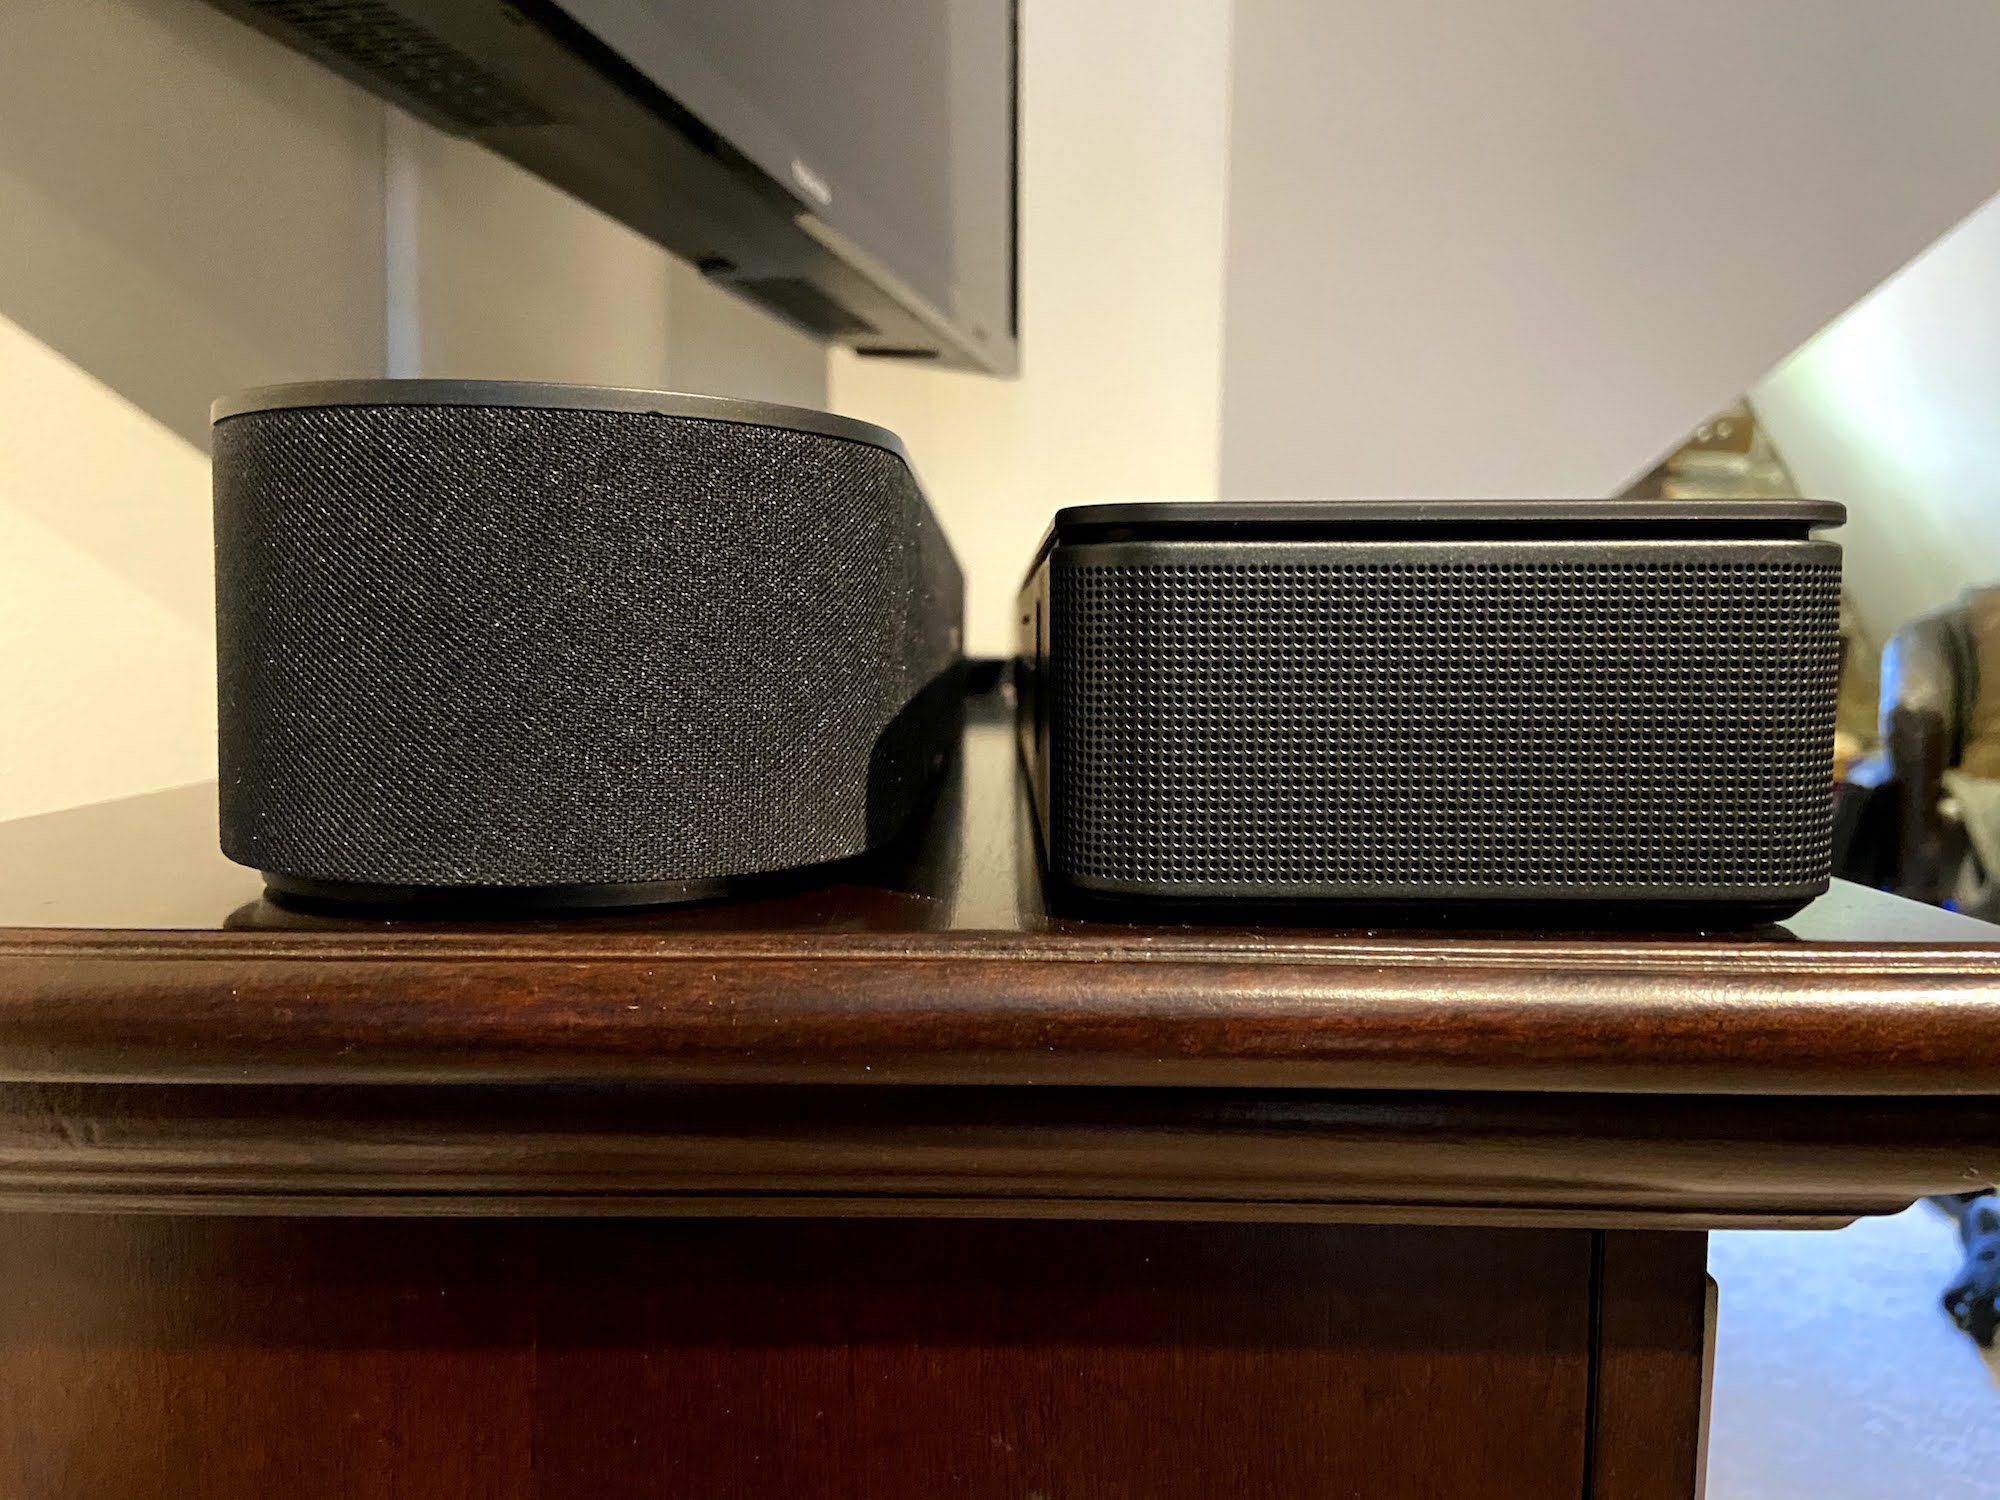 Bose Smart Soundbar  review: Sweet sound for small rooms